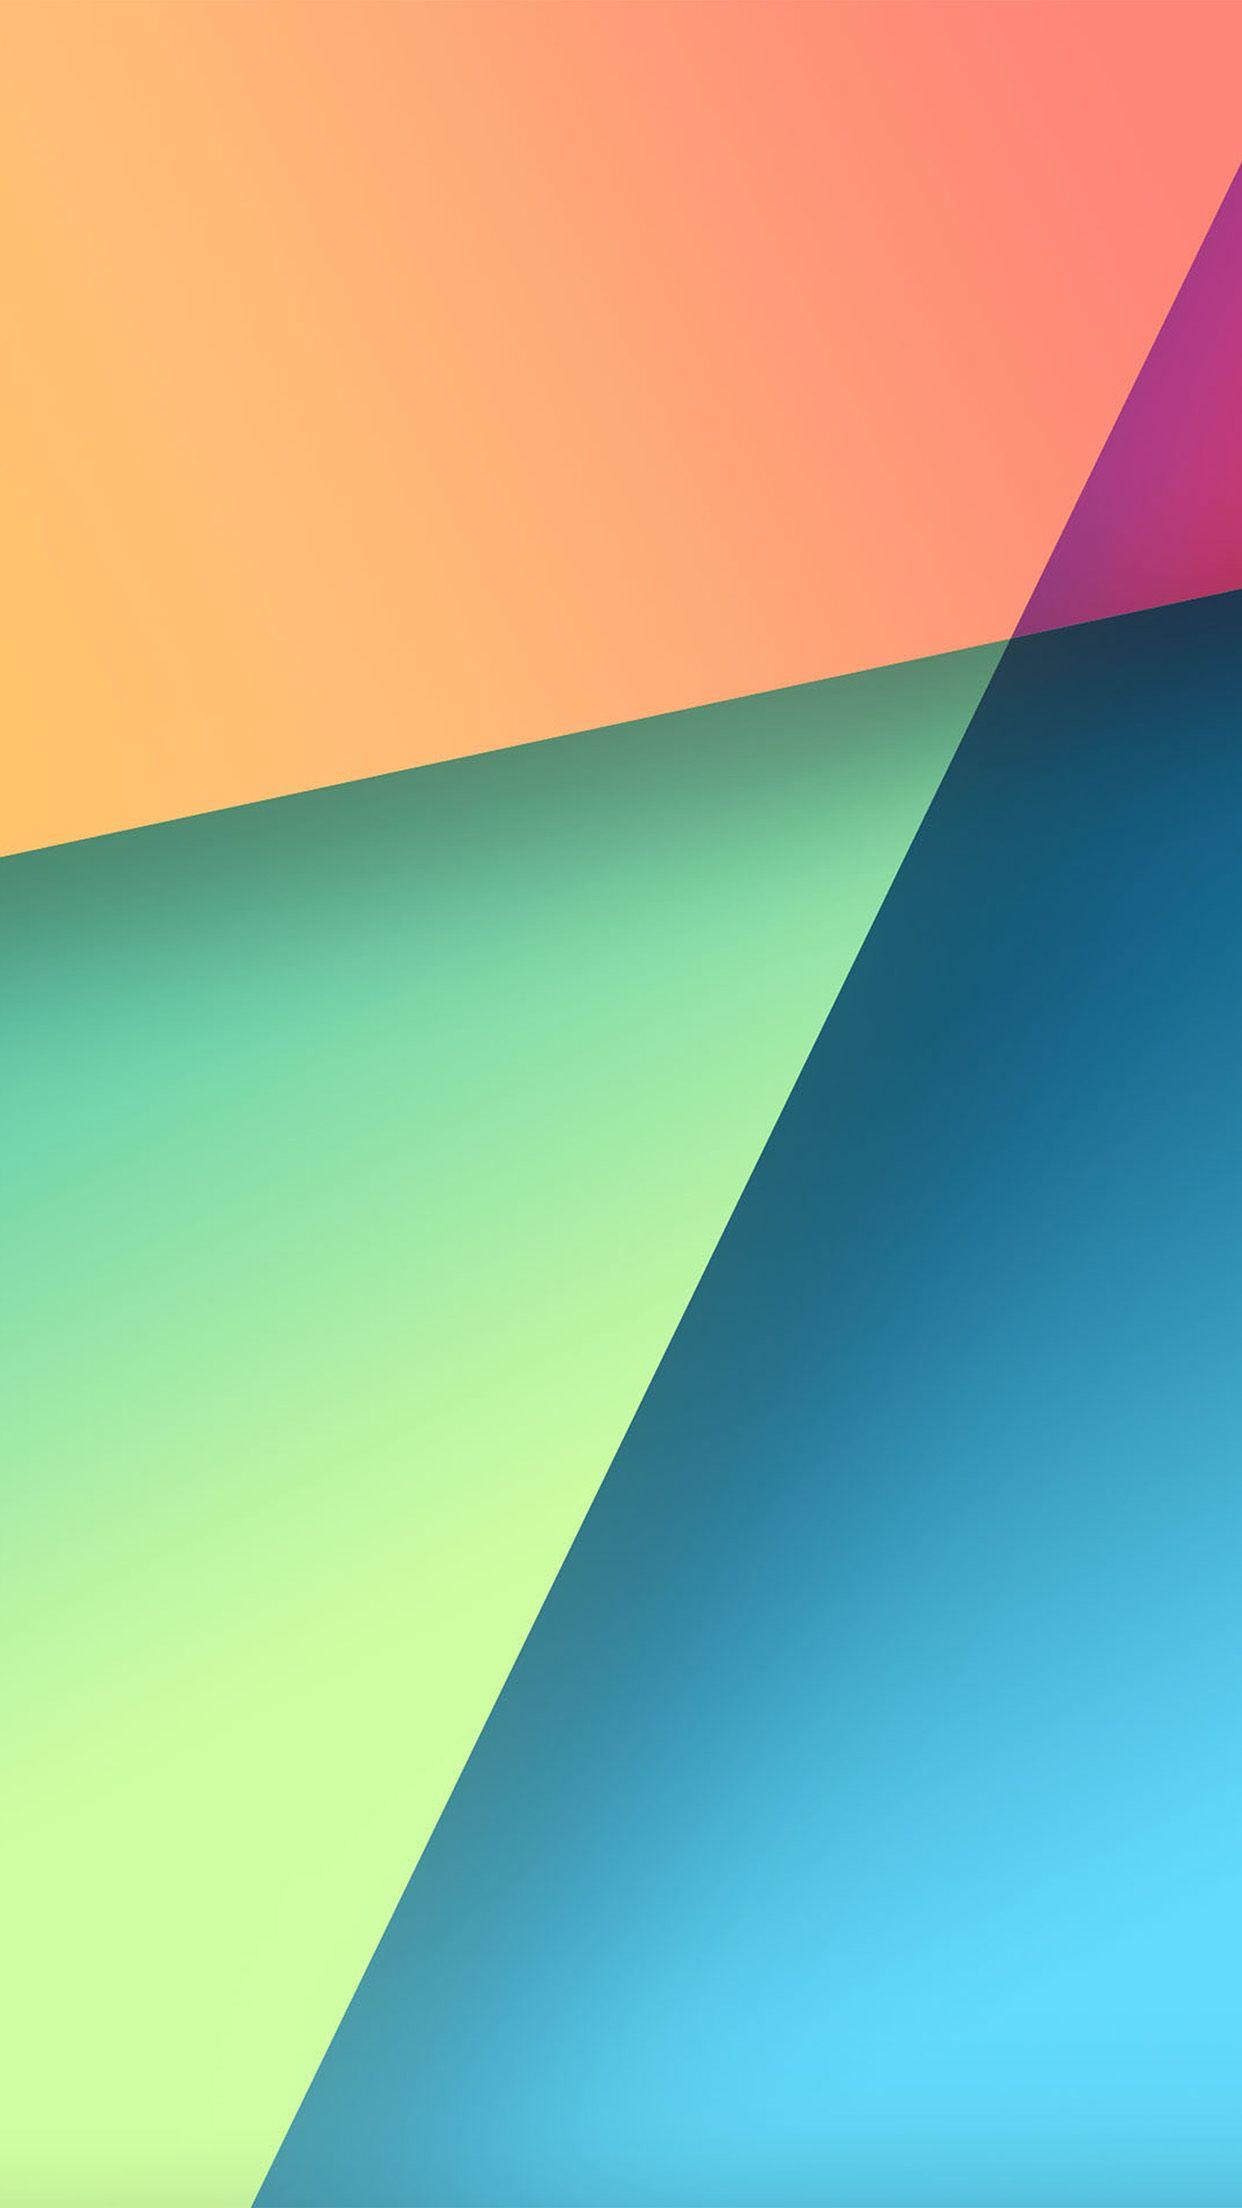 iPhonePapers background android rainbow pattern